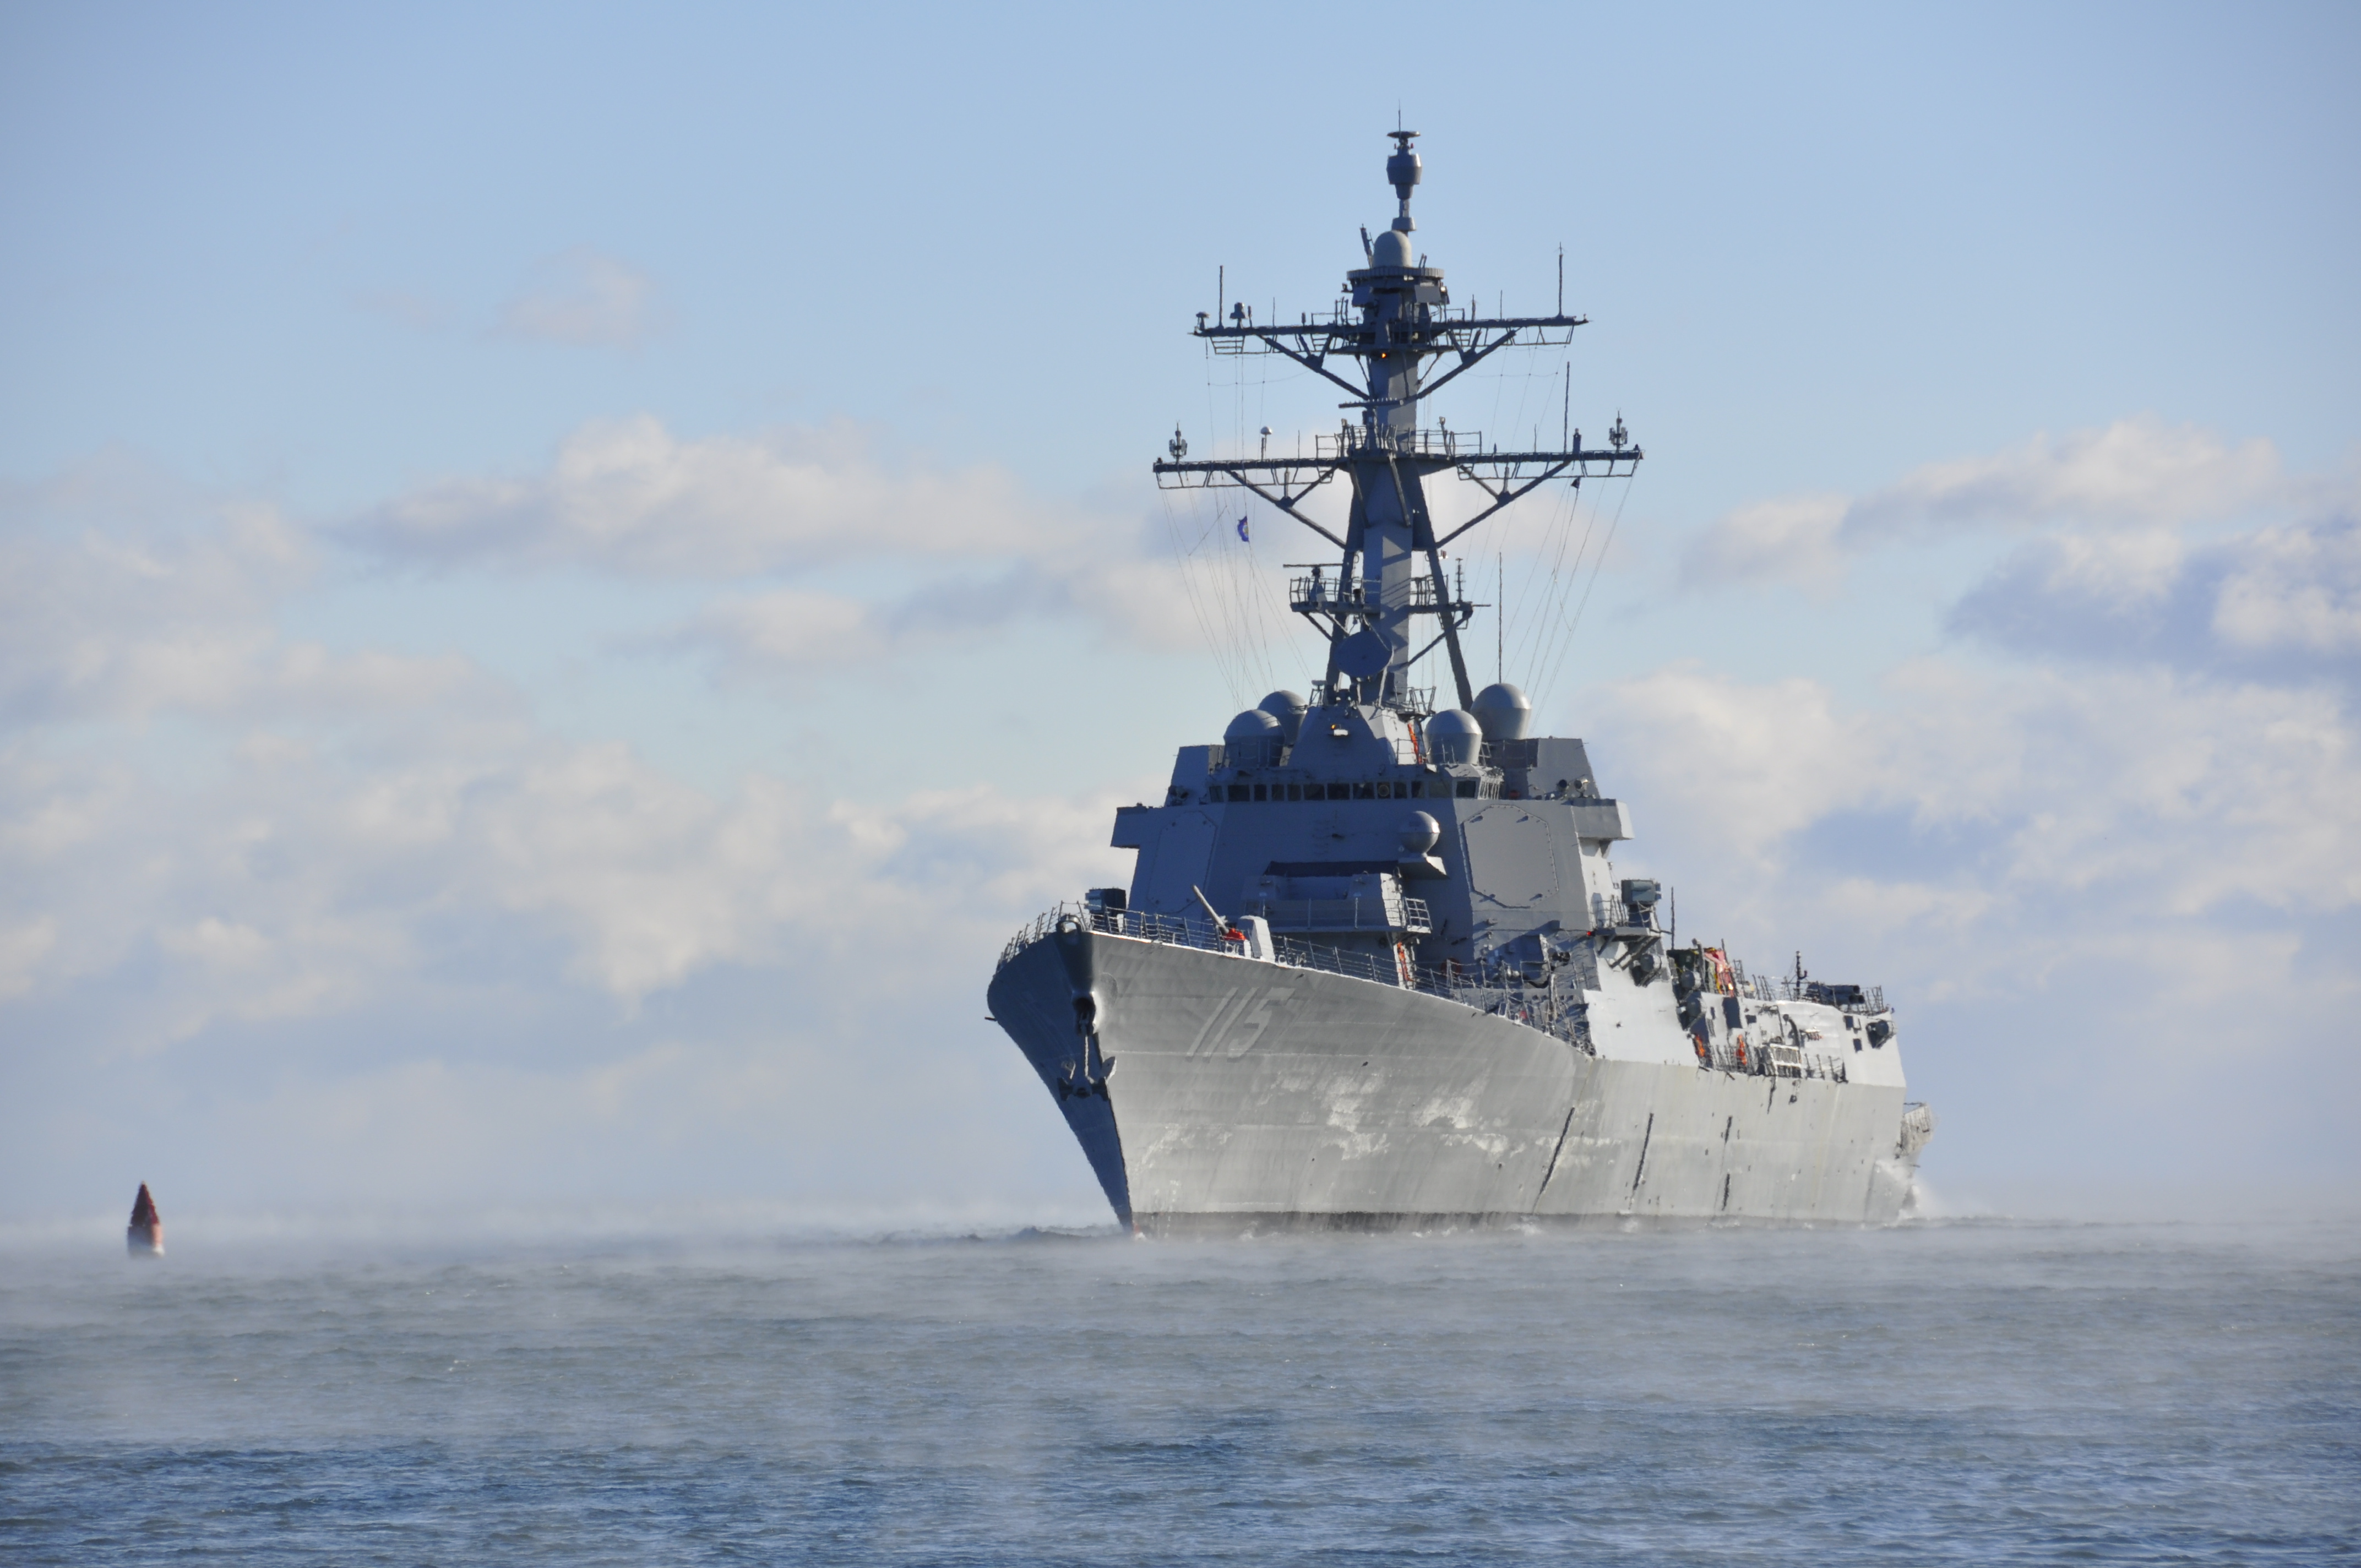 USS Rafael Peralta (DDG-115) successfully completed acceptance trials after spending two days underway off the coast of Maine on Dec. 16, 2016. US Navy Photo